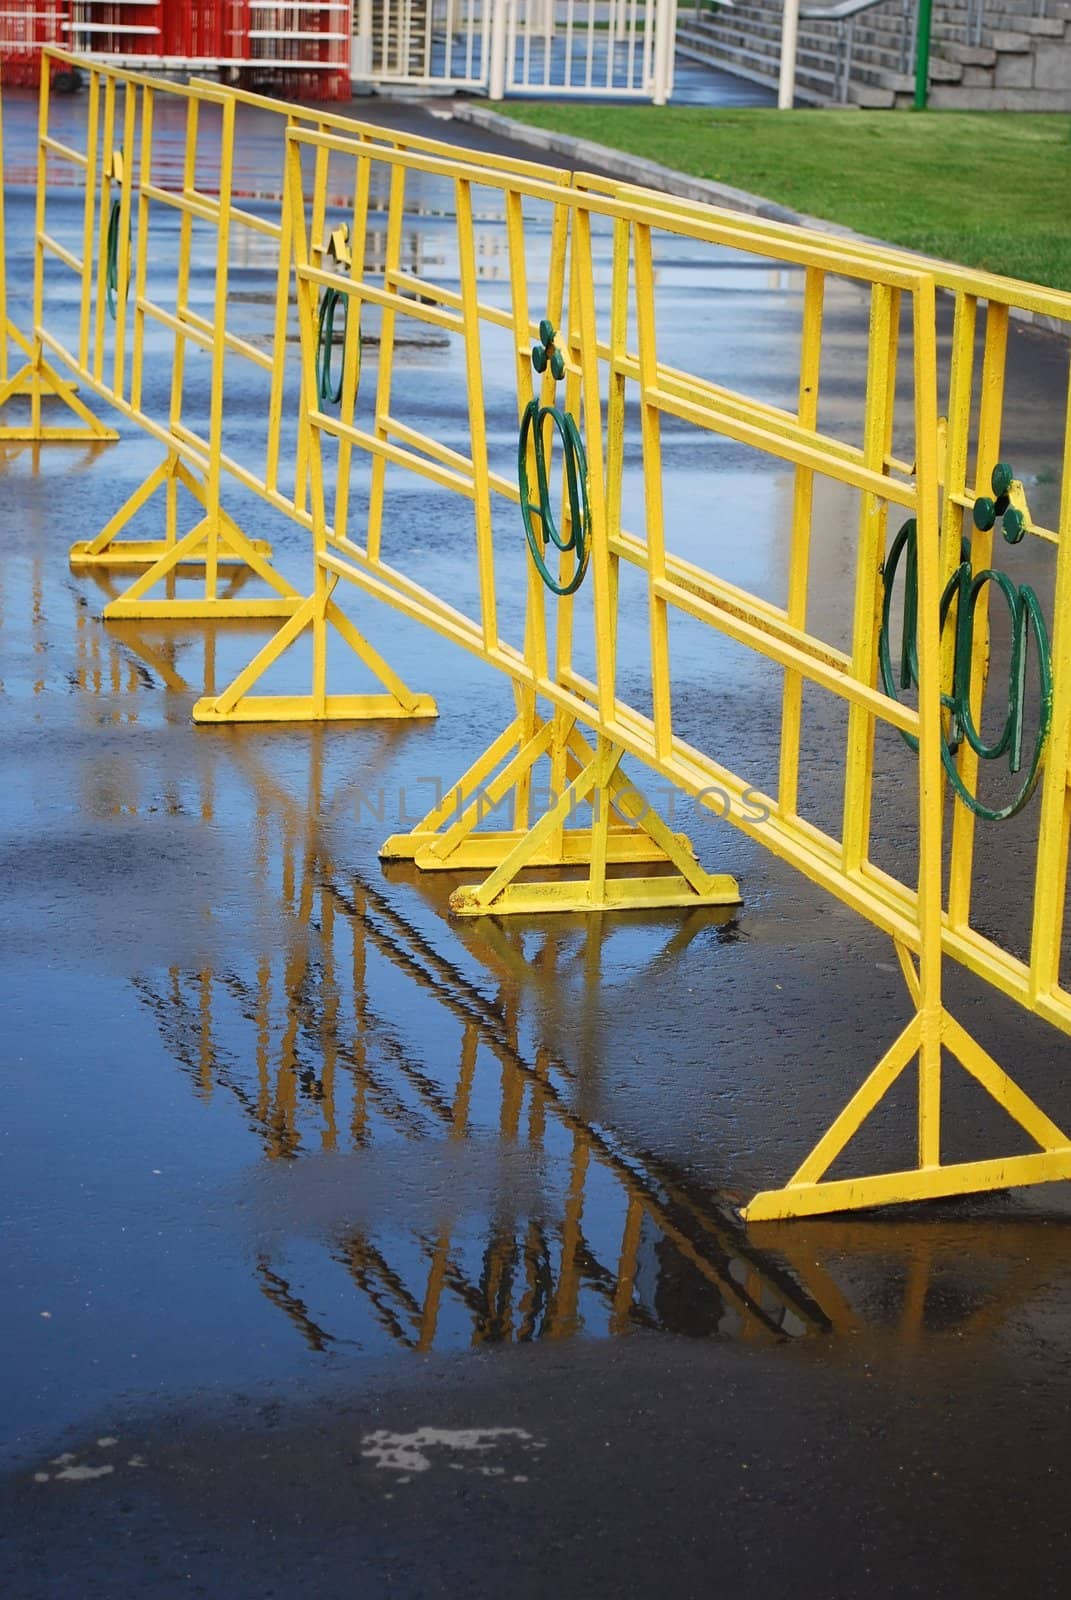 Bright yellow crowd control fence with reflection after rain